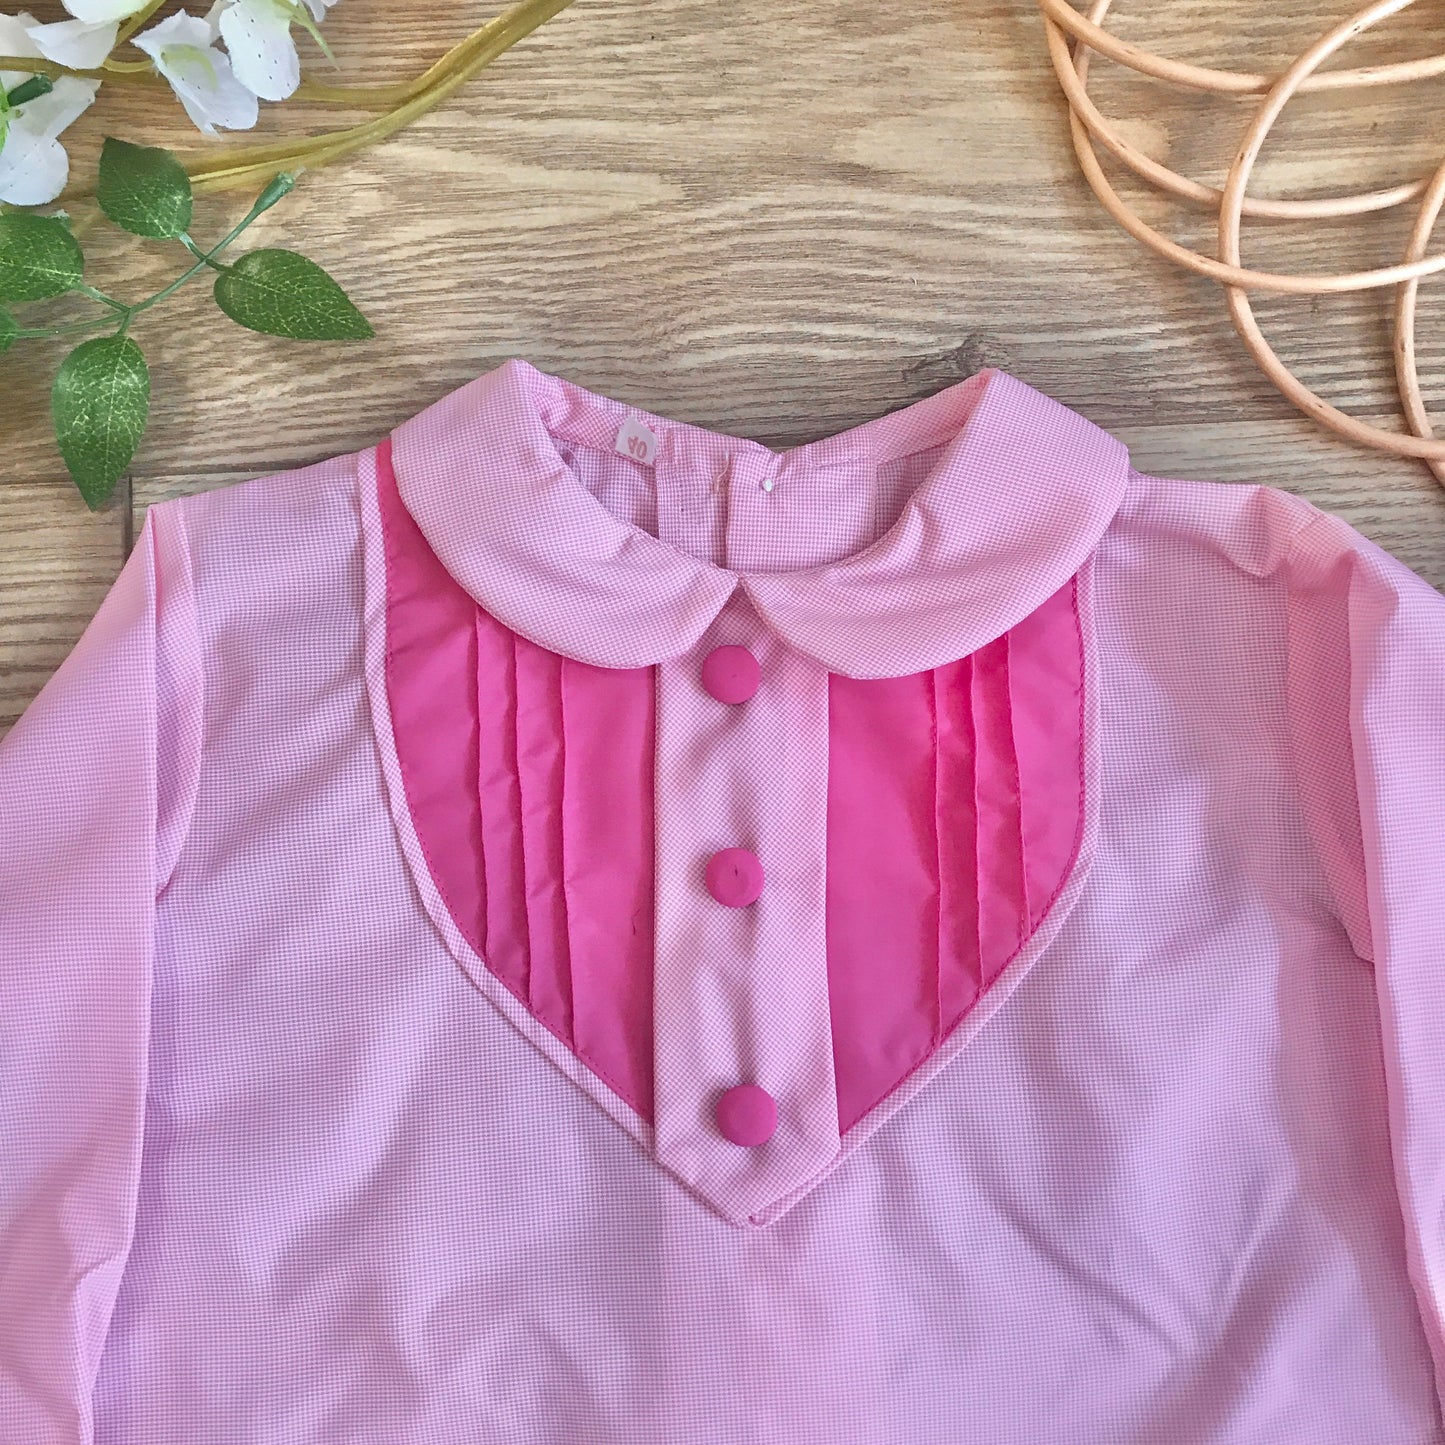 Vintage 1960s "Baby Duck" Pink Baby / Toddler Dress / Blouse French Made 12-18 Months